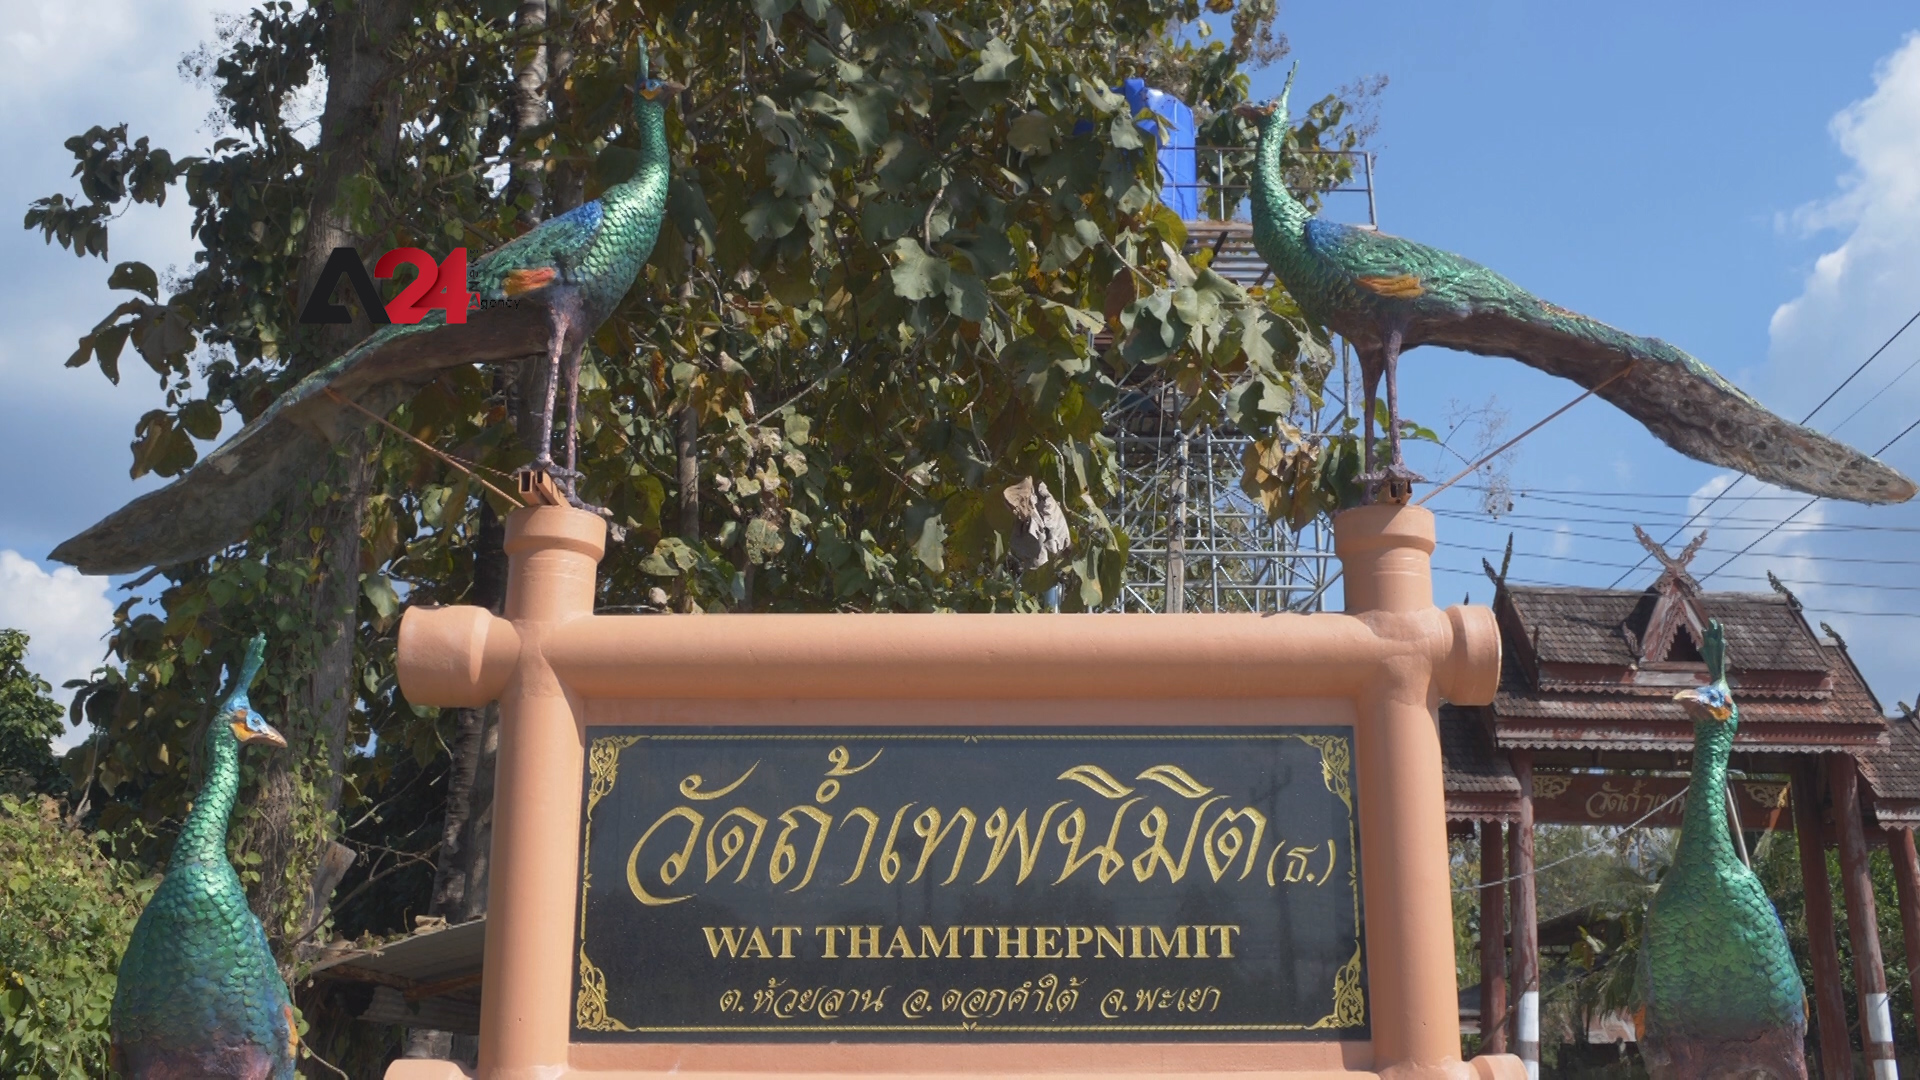 Thailand – A Thai temple feeds peacocks to keep them away from agricultural fields